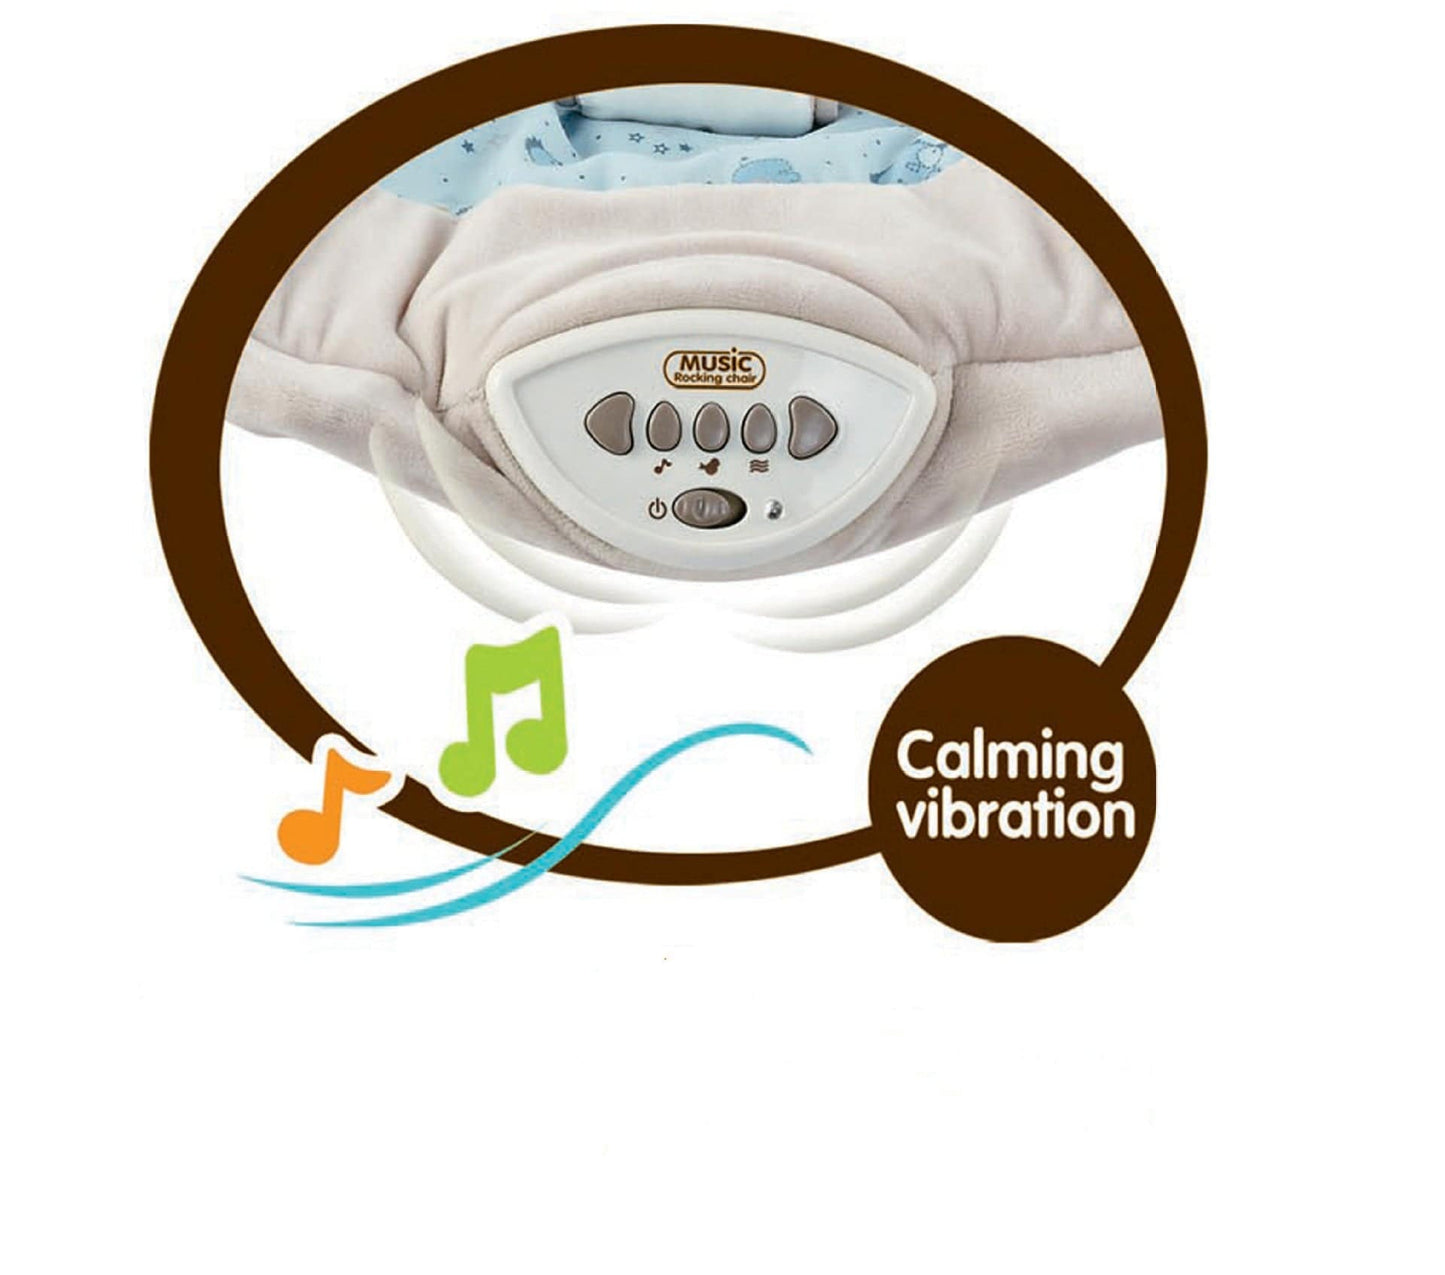 COOLBABY Intelligent Remote-Controlled Baby Rocking Bed - COOL BABY